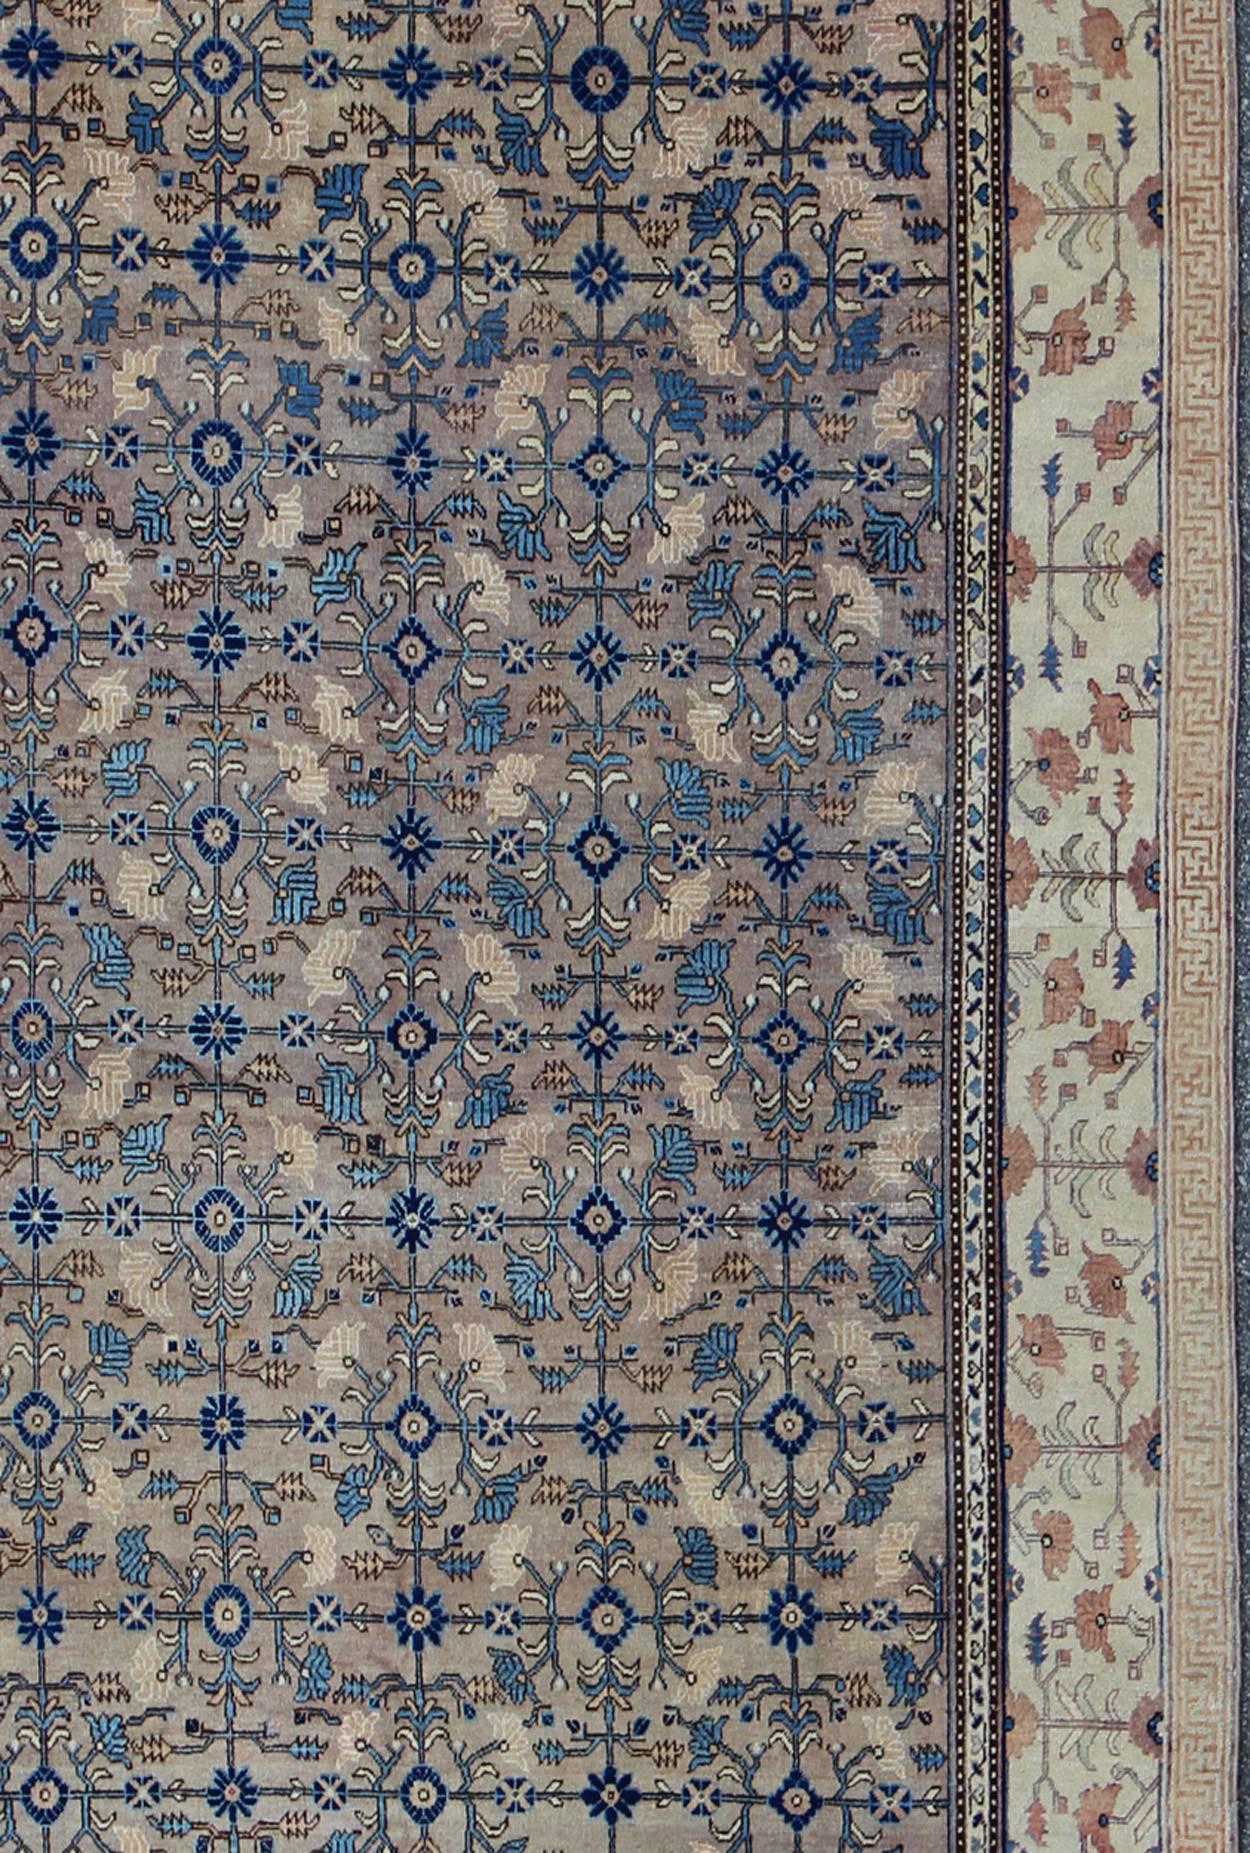 Hand-Knotted Antique Khotan Rug with All-Over Floral Blossom Design in Gray, Ivory and Blue